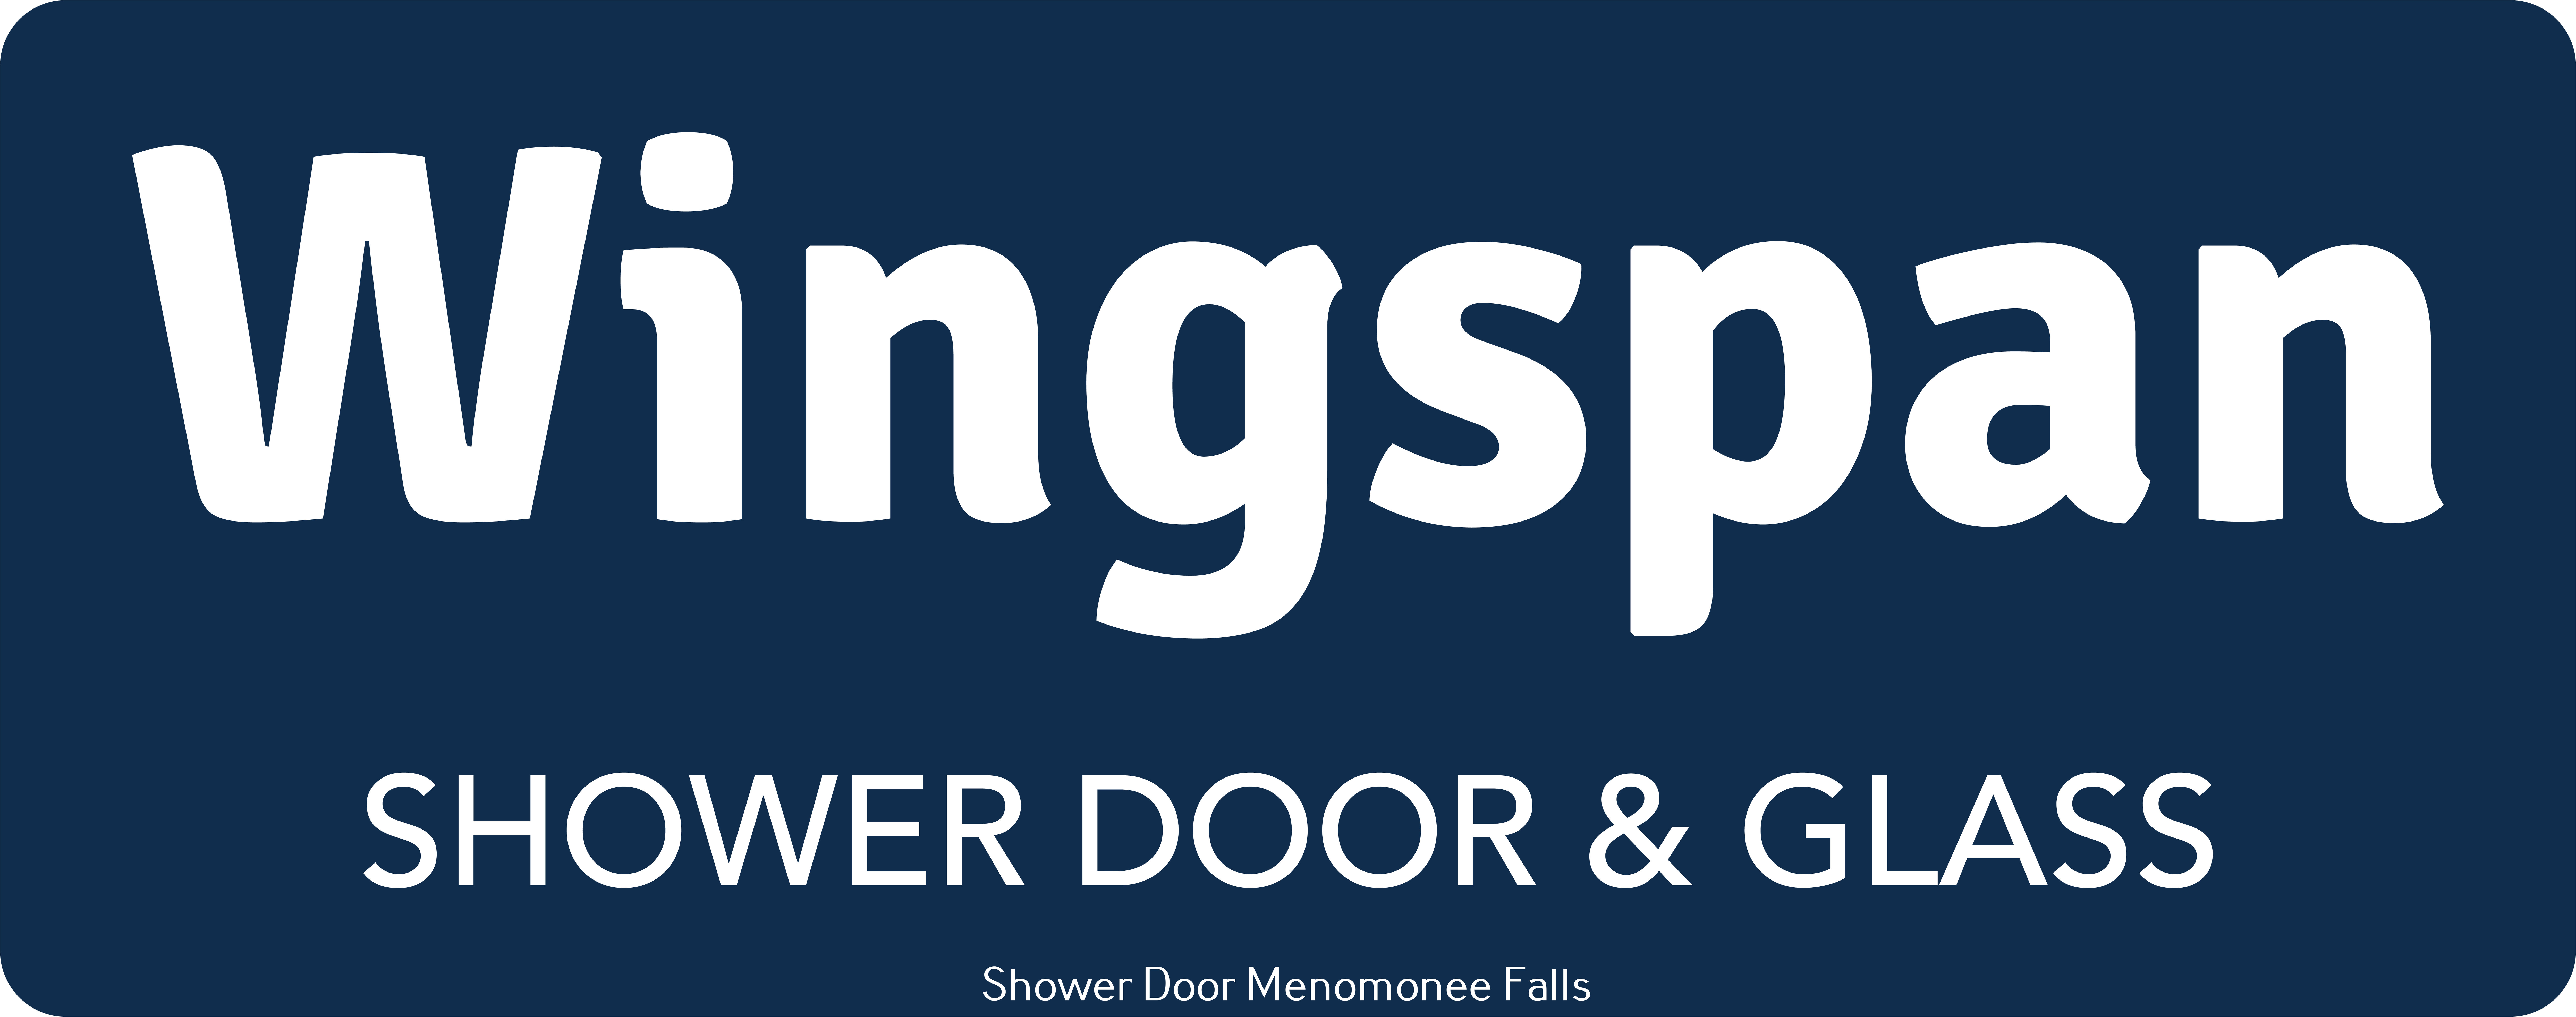 Wingspan Shower Door & Glass Outlines Transformative Effects of Upgrading to a Frameless Shower Door